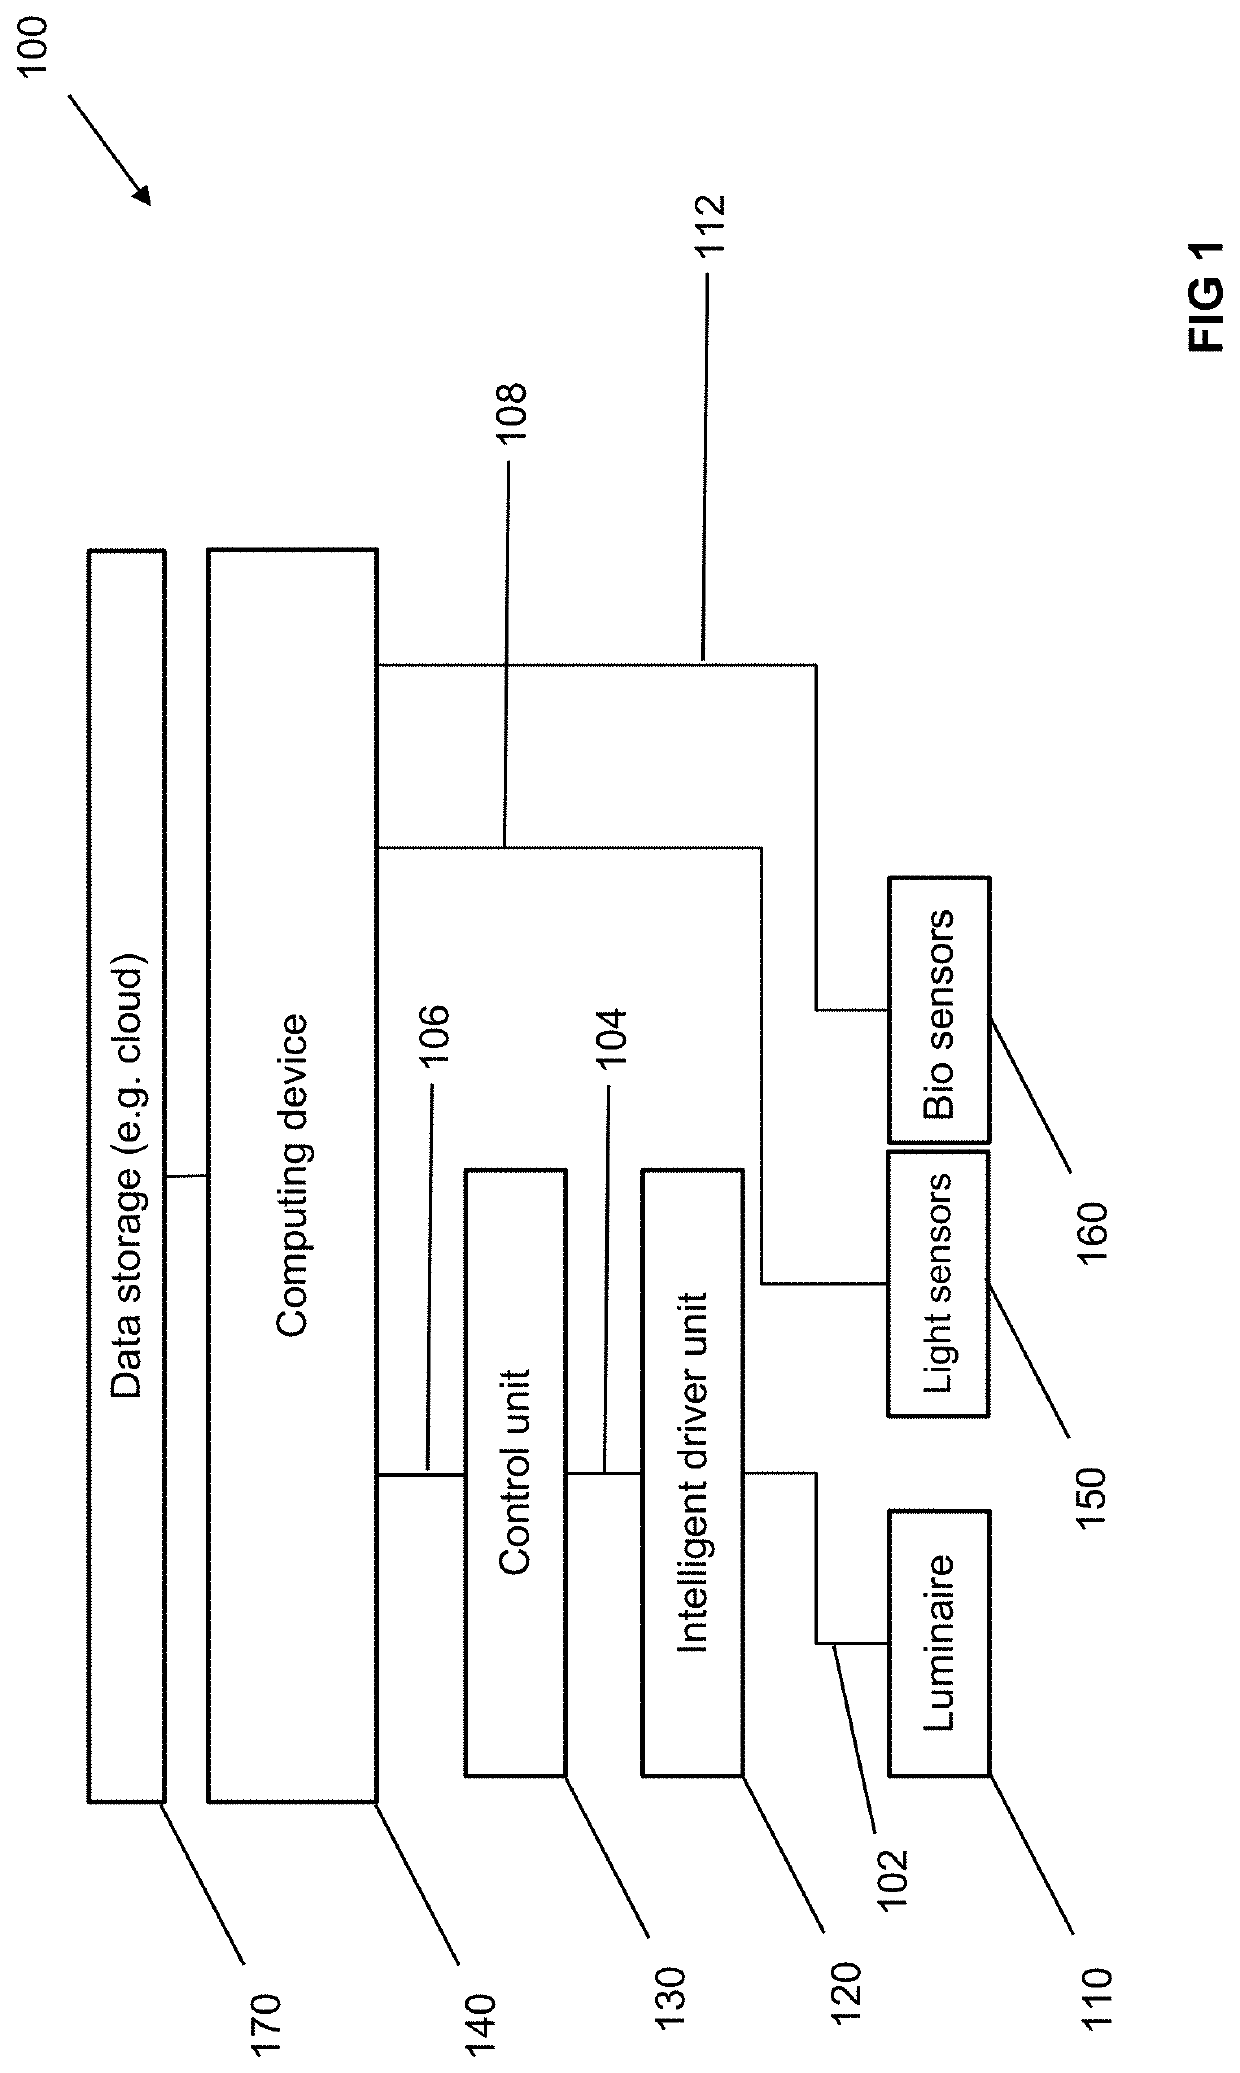 Controlled Agricultural Systems and Methods of Managing Agricultural Systems